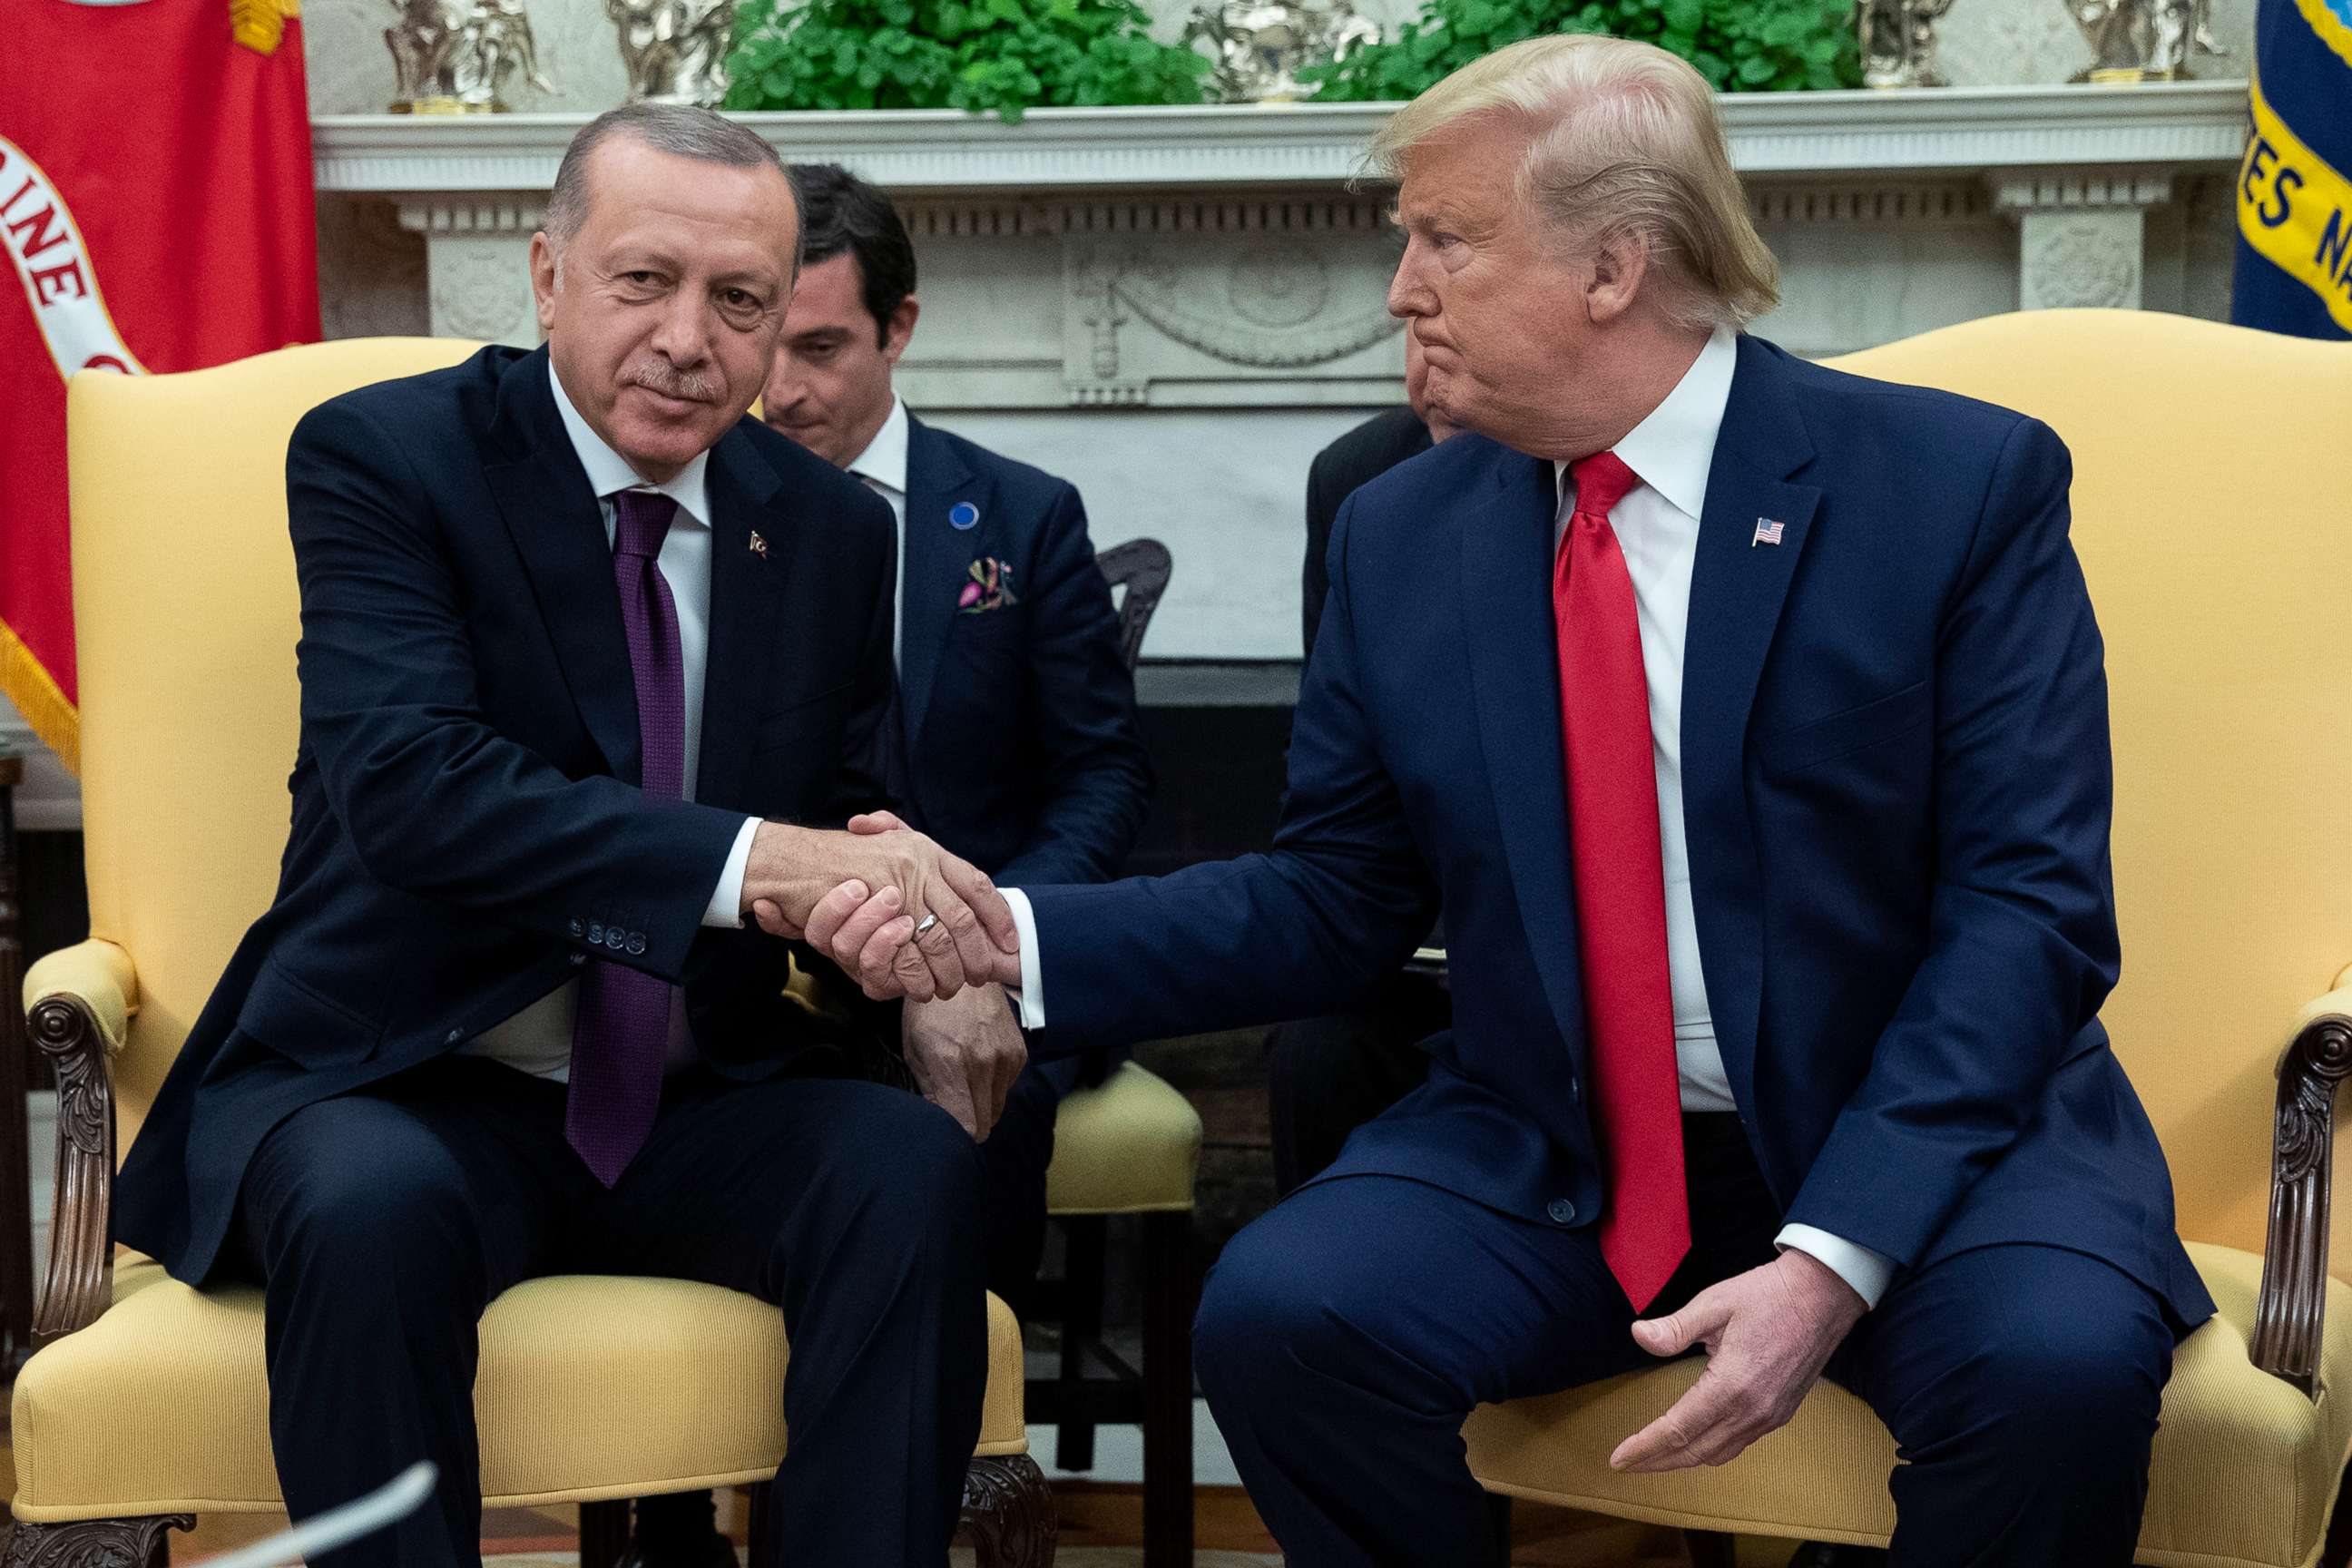 PHOTO: President Donald Trump meets with Turkish President Recep Tayyip Erdogan in the Oval Office of the White House, Nov. 13, 2019, in Washington, D.C.